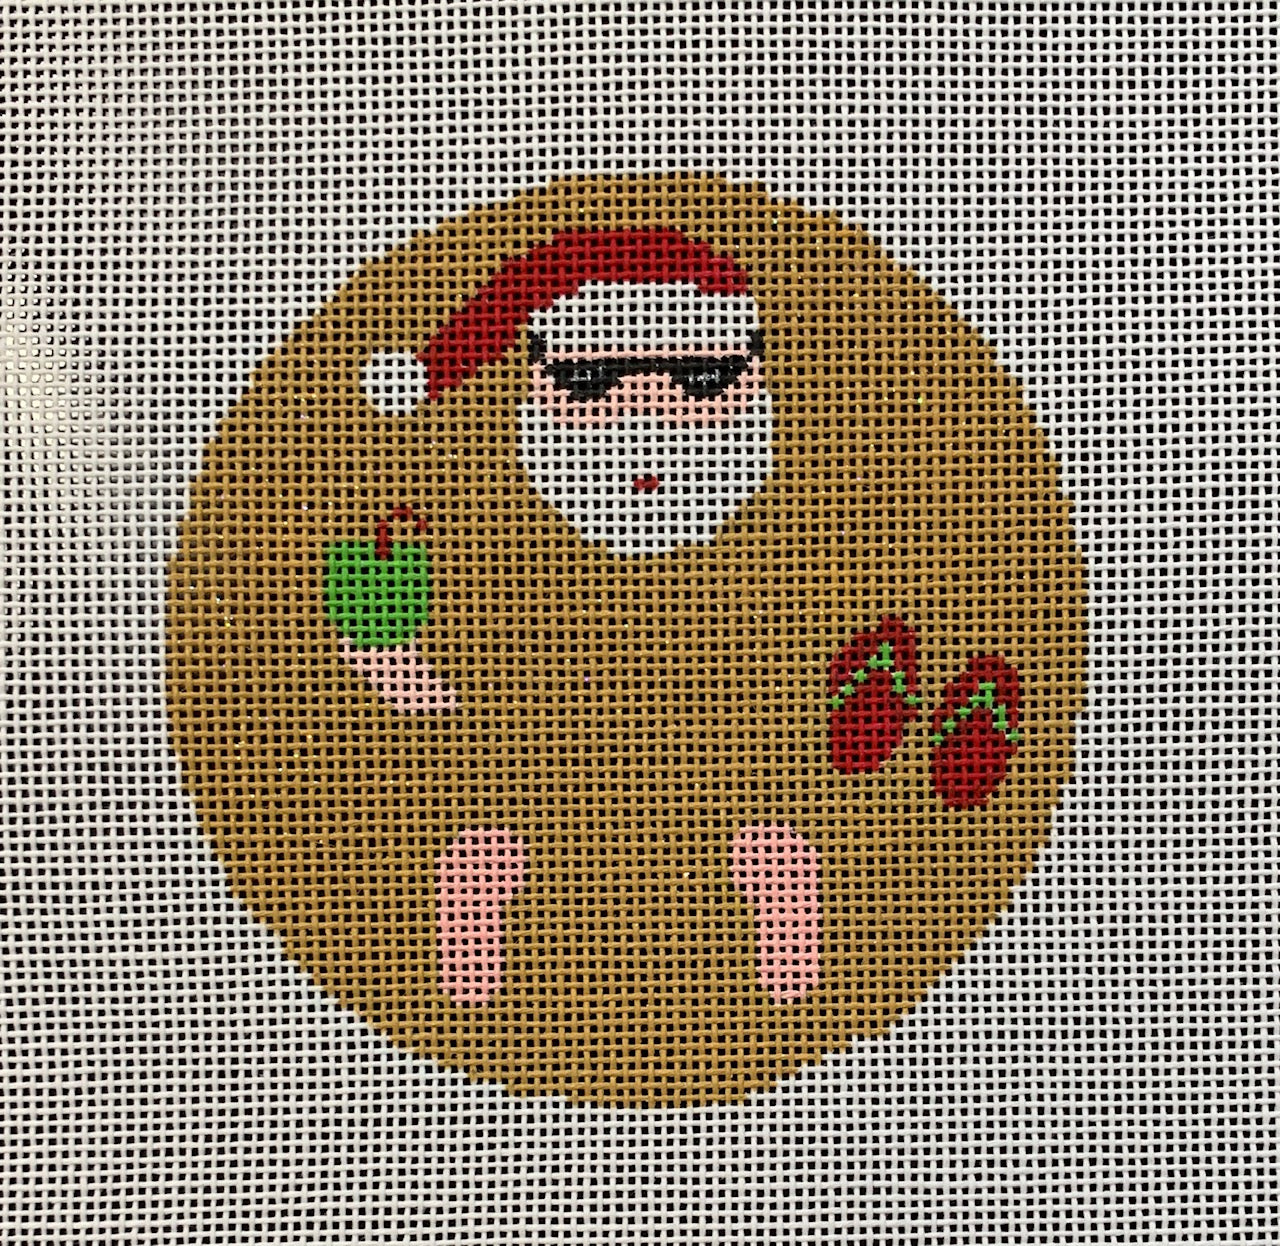 Vallerie Needlepoint Gallery whimsical round Christmas ornament needlepoint canvas of Santa buried in the sand with flip flops